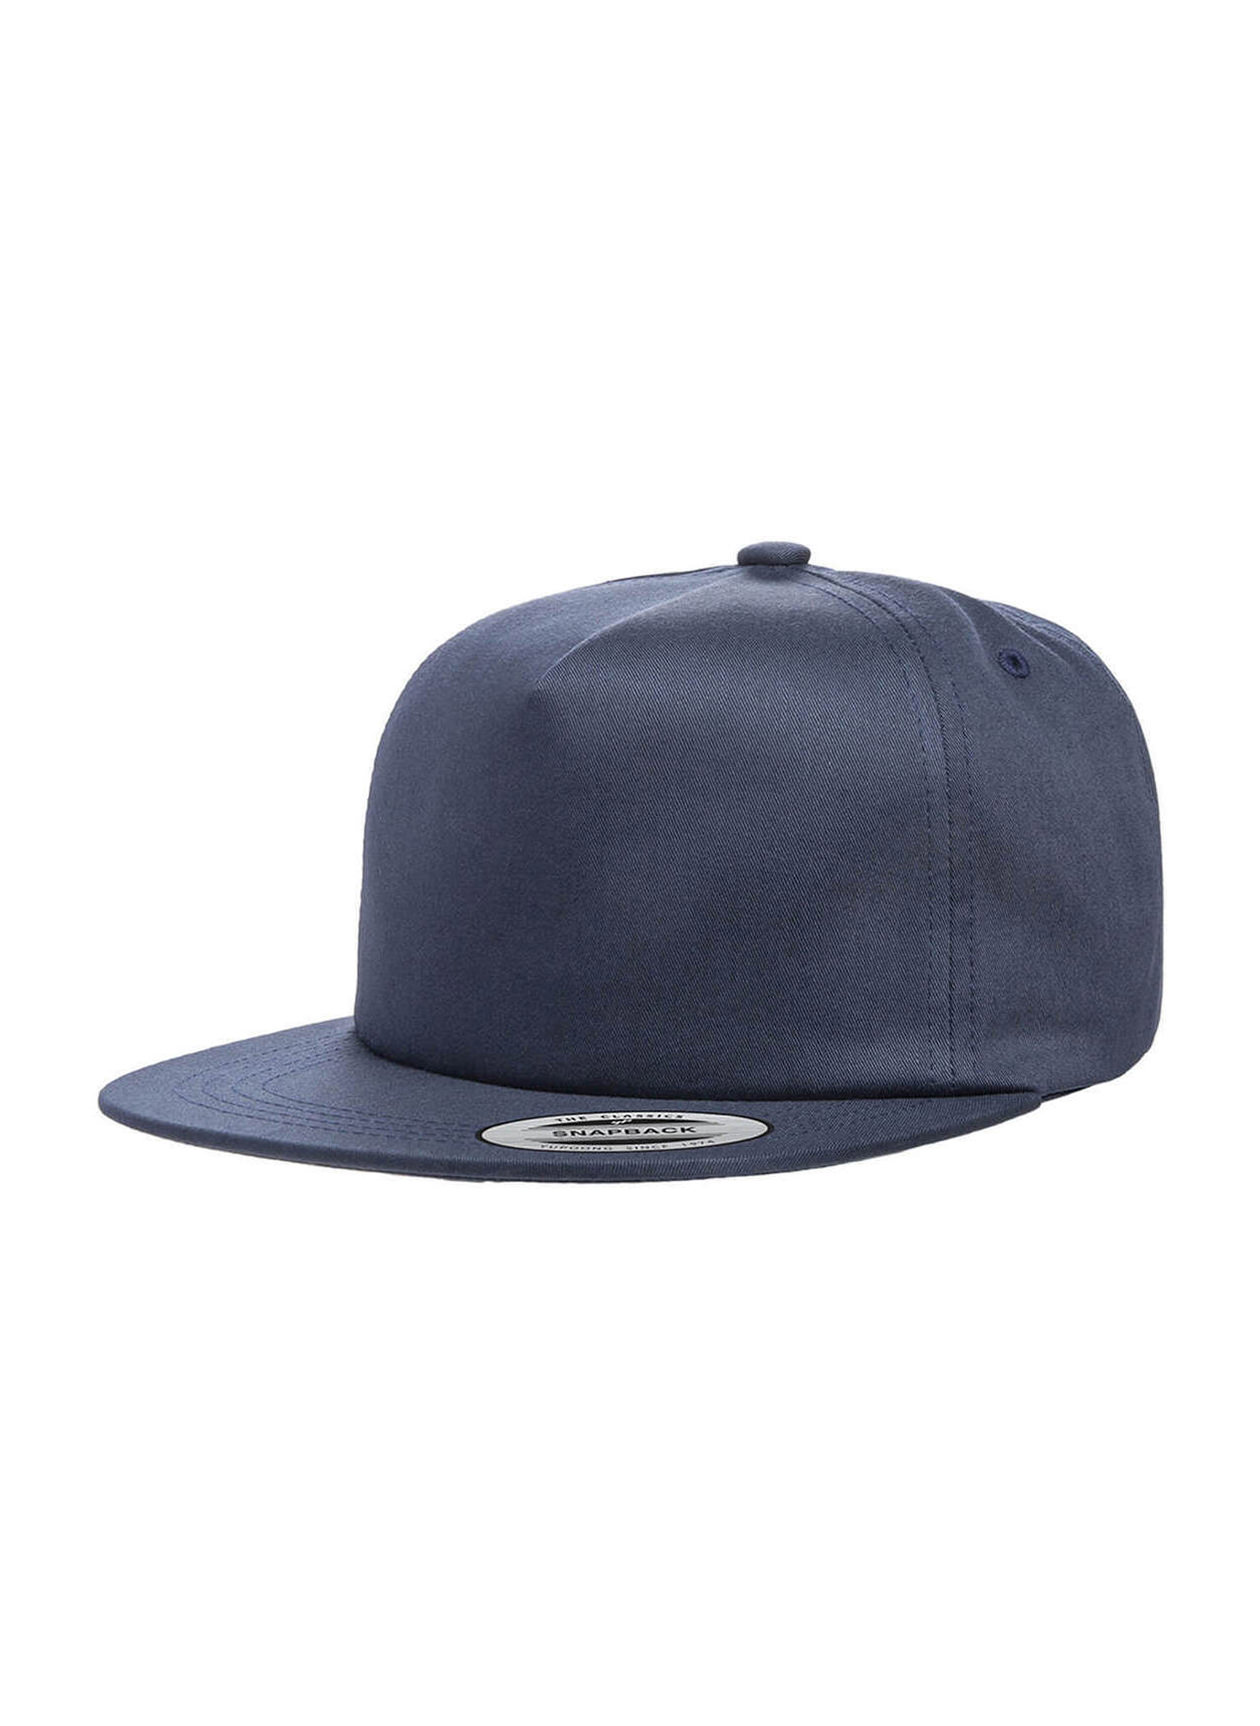 Yupoong Navy Unstructured 5-Panel Snapback Hat